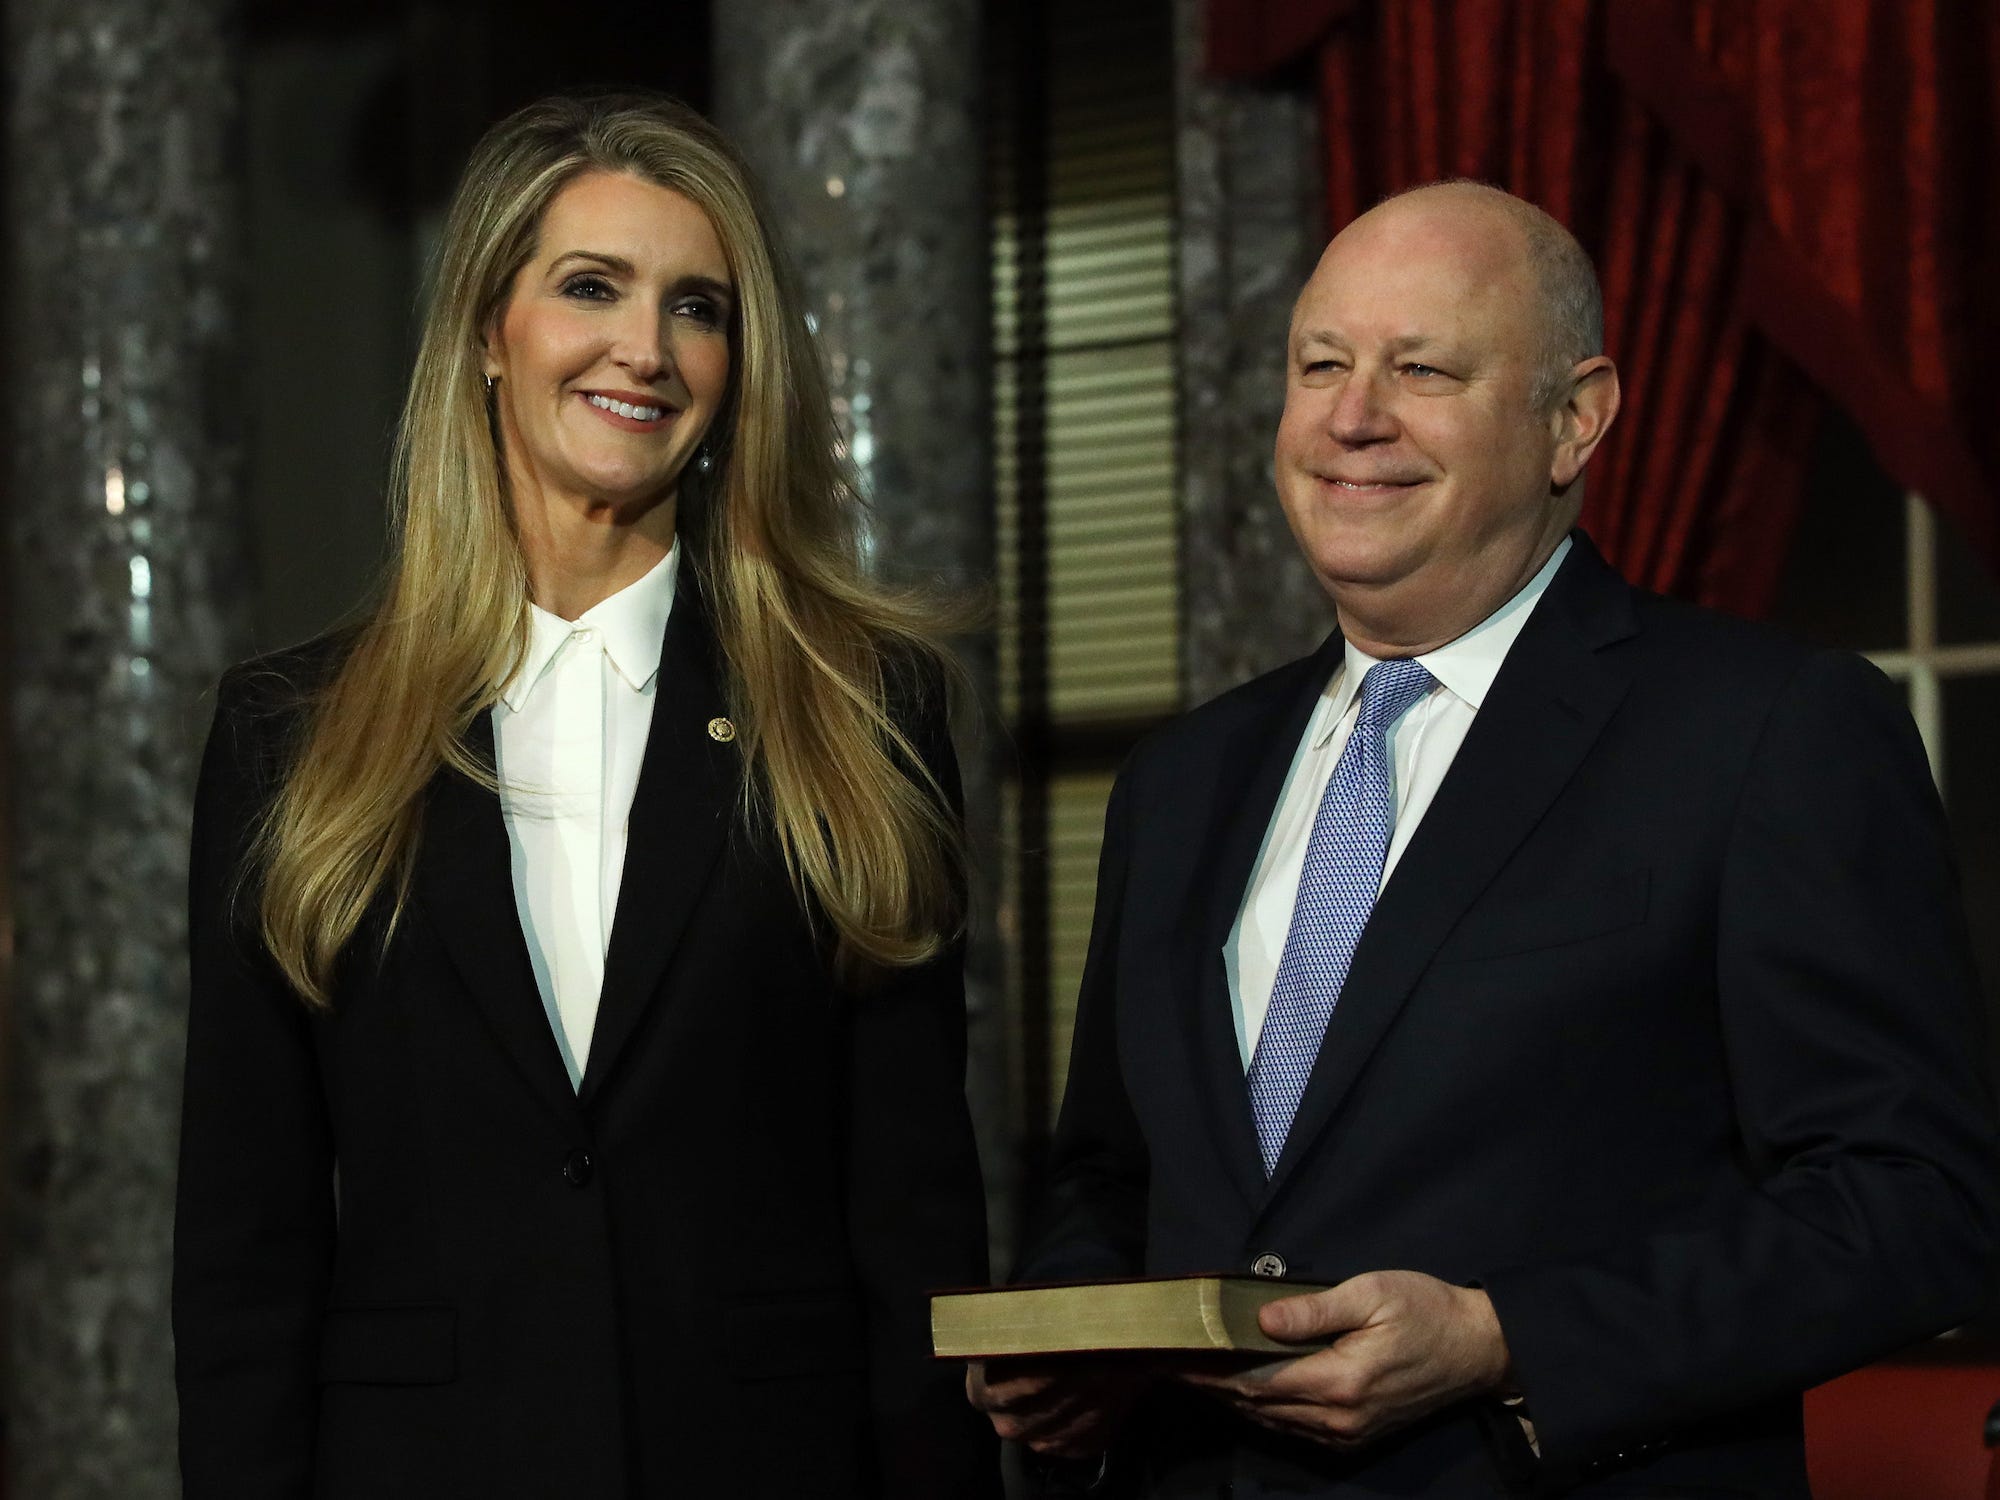 <p>Former Sen. Kelly Loeffler and her husband, Jeff Sprecher, have each contributed <span>$824,600 to the Trump 47 Committee.</span></p><p>Loeffler was appointed to the Senate at the end of 2019 by Georgia Gov. Brian Kemp after the death of Sen. Johnny Isakson. </p><p>She later lost in a runoff election in January 2021 to Democrat Raphael Warnock, who went on to win a full term in 2022.</p><p>Sprecher, meanwhile, is the CEO of Intercontinental Exchange and previously served as the chairman of the New York Stock Exchange.</p>